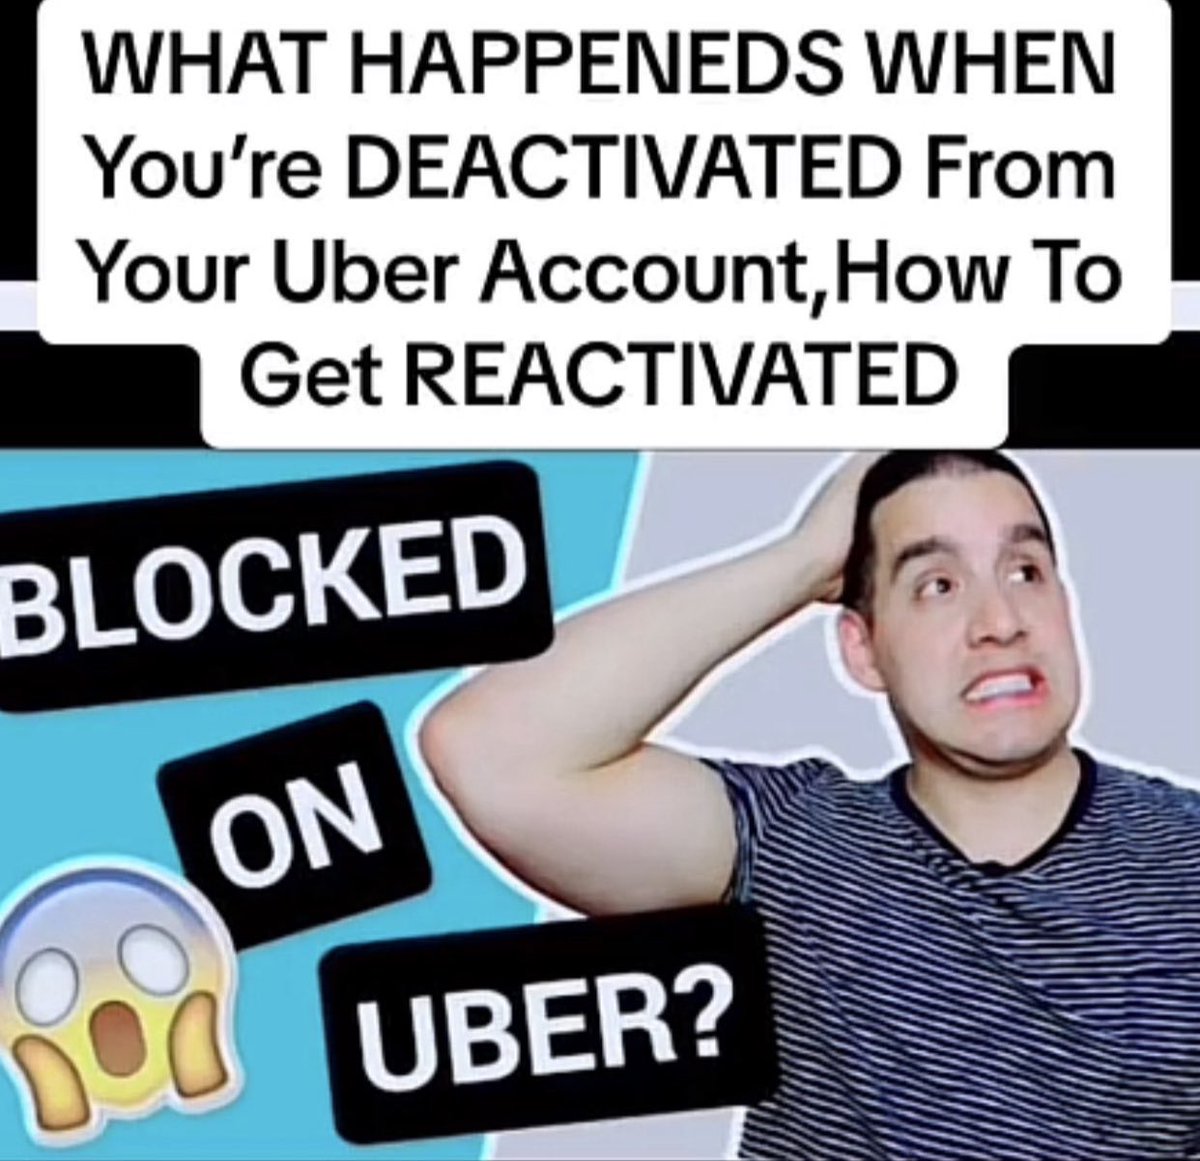 Dm for account reactivation!
#uberuk #ubercar #uberdriver #über #uber #viral #reactivate #deactivated #accounts #driving #drivers
#delivery #deliveryservice #driver #uberusa #ubercanada
#uberservice #uberaus #uberaustralia
#ubercanadá #ubercalifornia #tuberfloripa #uberfloripa